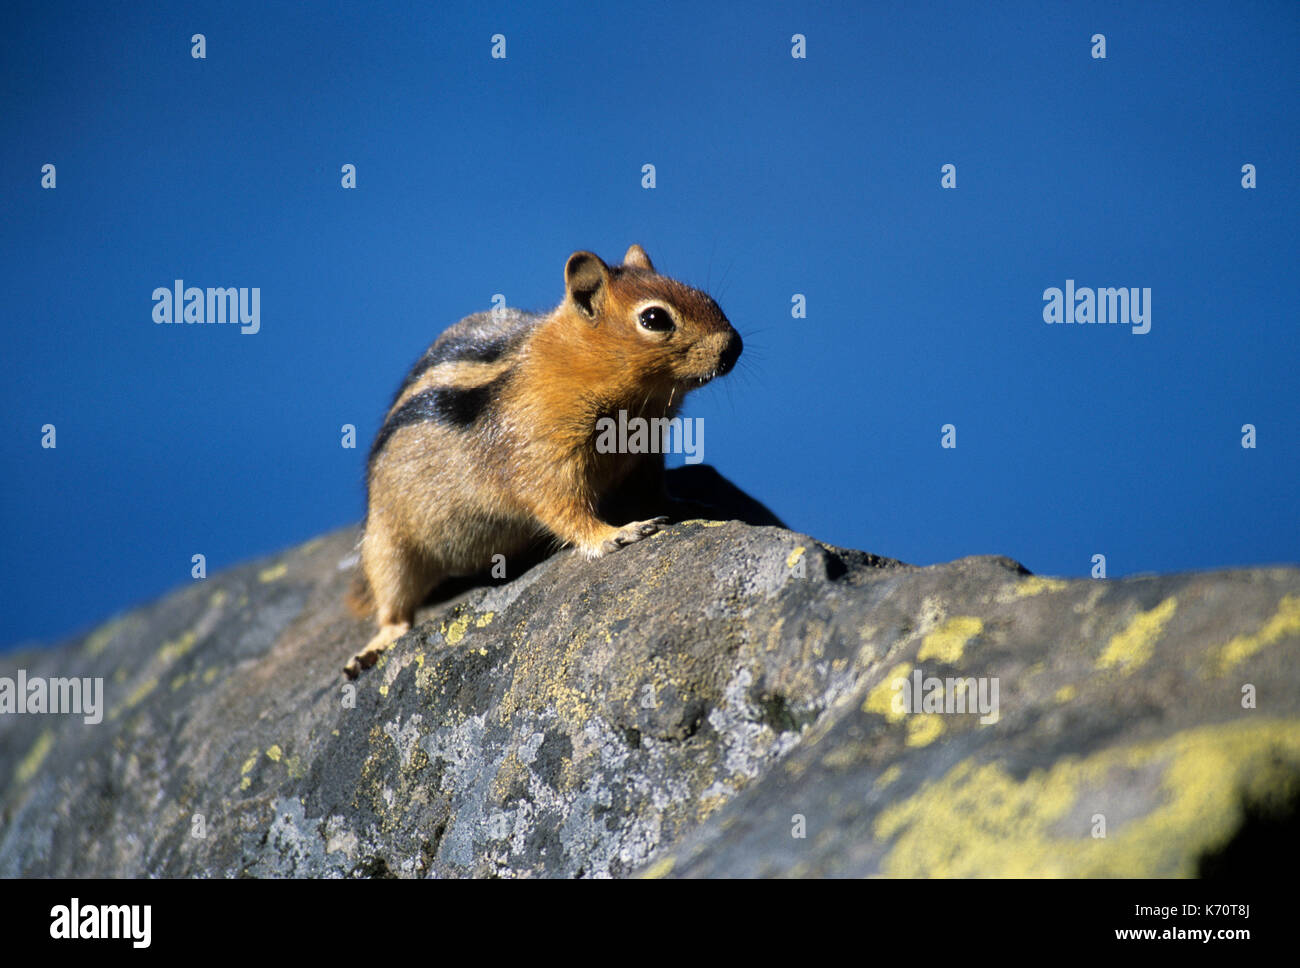 Golden-mantled ground squirrel (Spermophilus lateralis), Olallie Lake Scenic Area, Mt Hood National Forest, Oregon Stock Photo